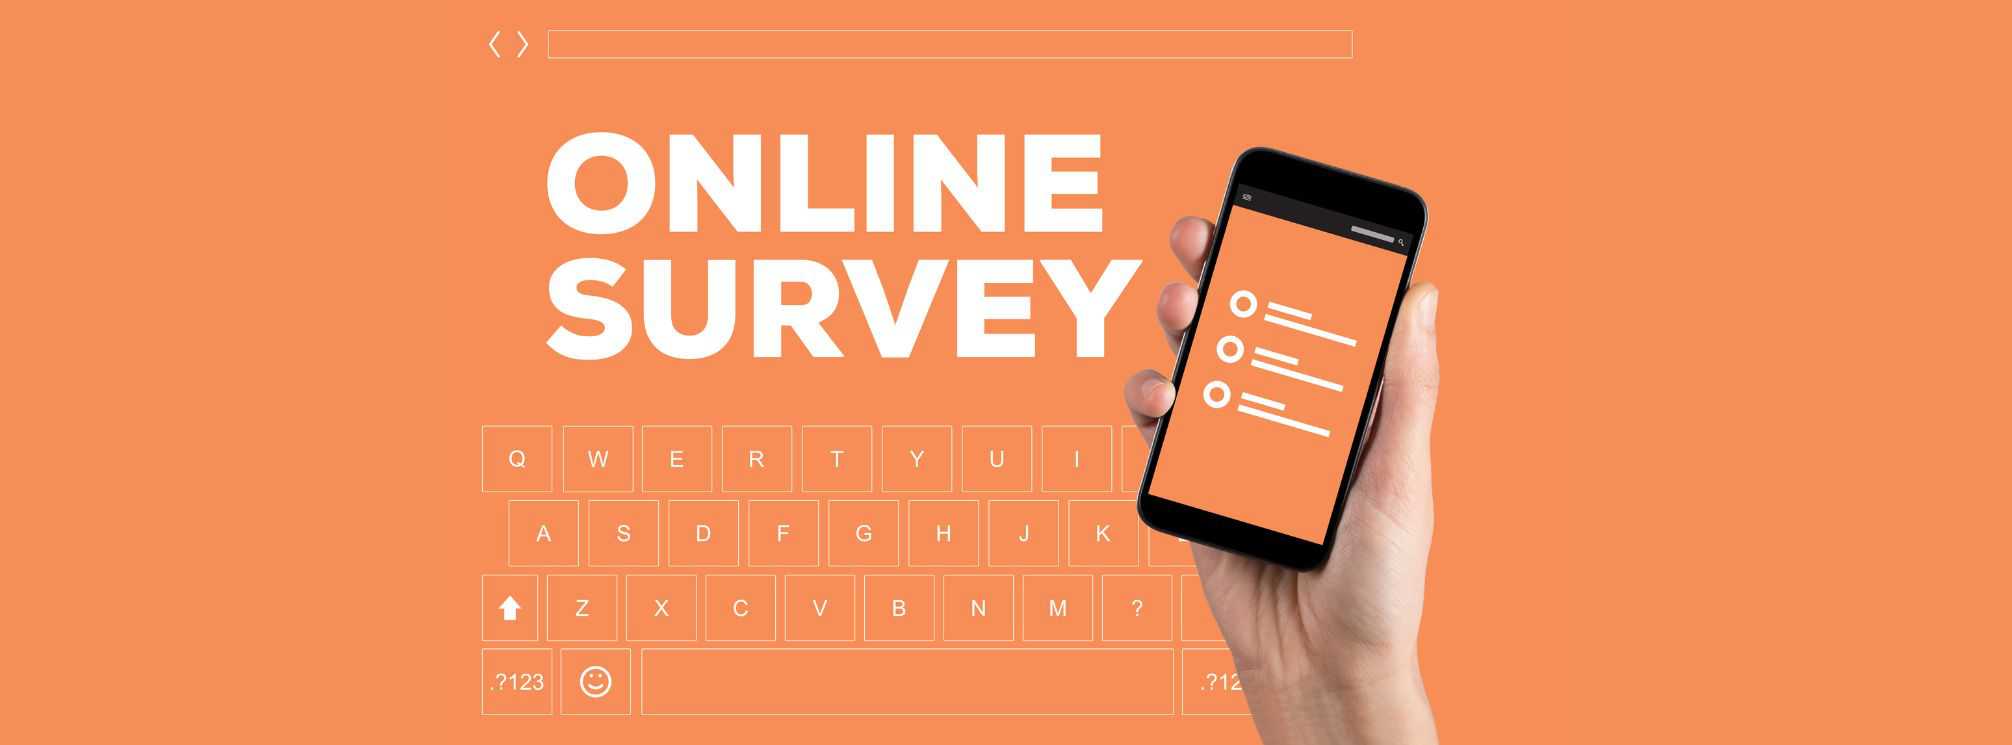 orange graphic with a person holding up their phone with a pulse survey on it. The words "online survey" are on the backdrop of the image.